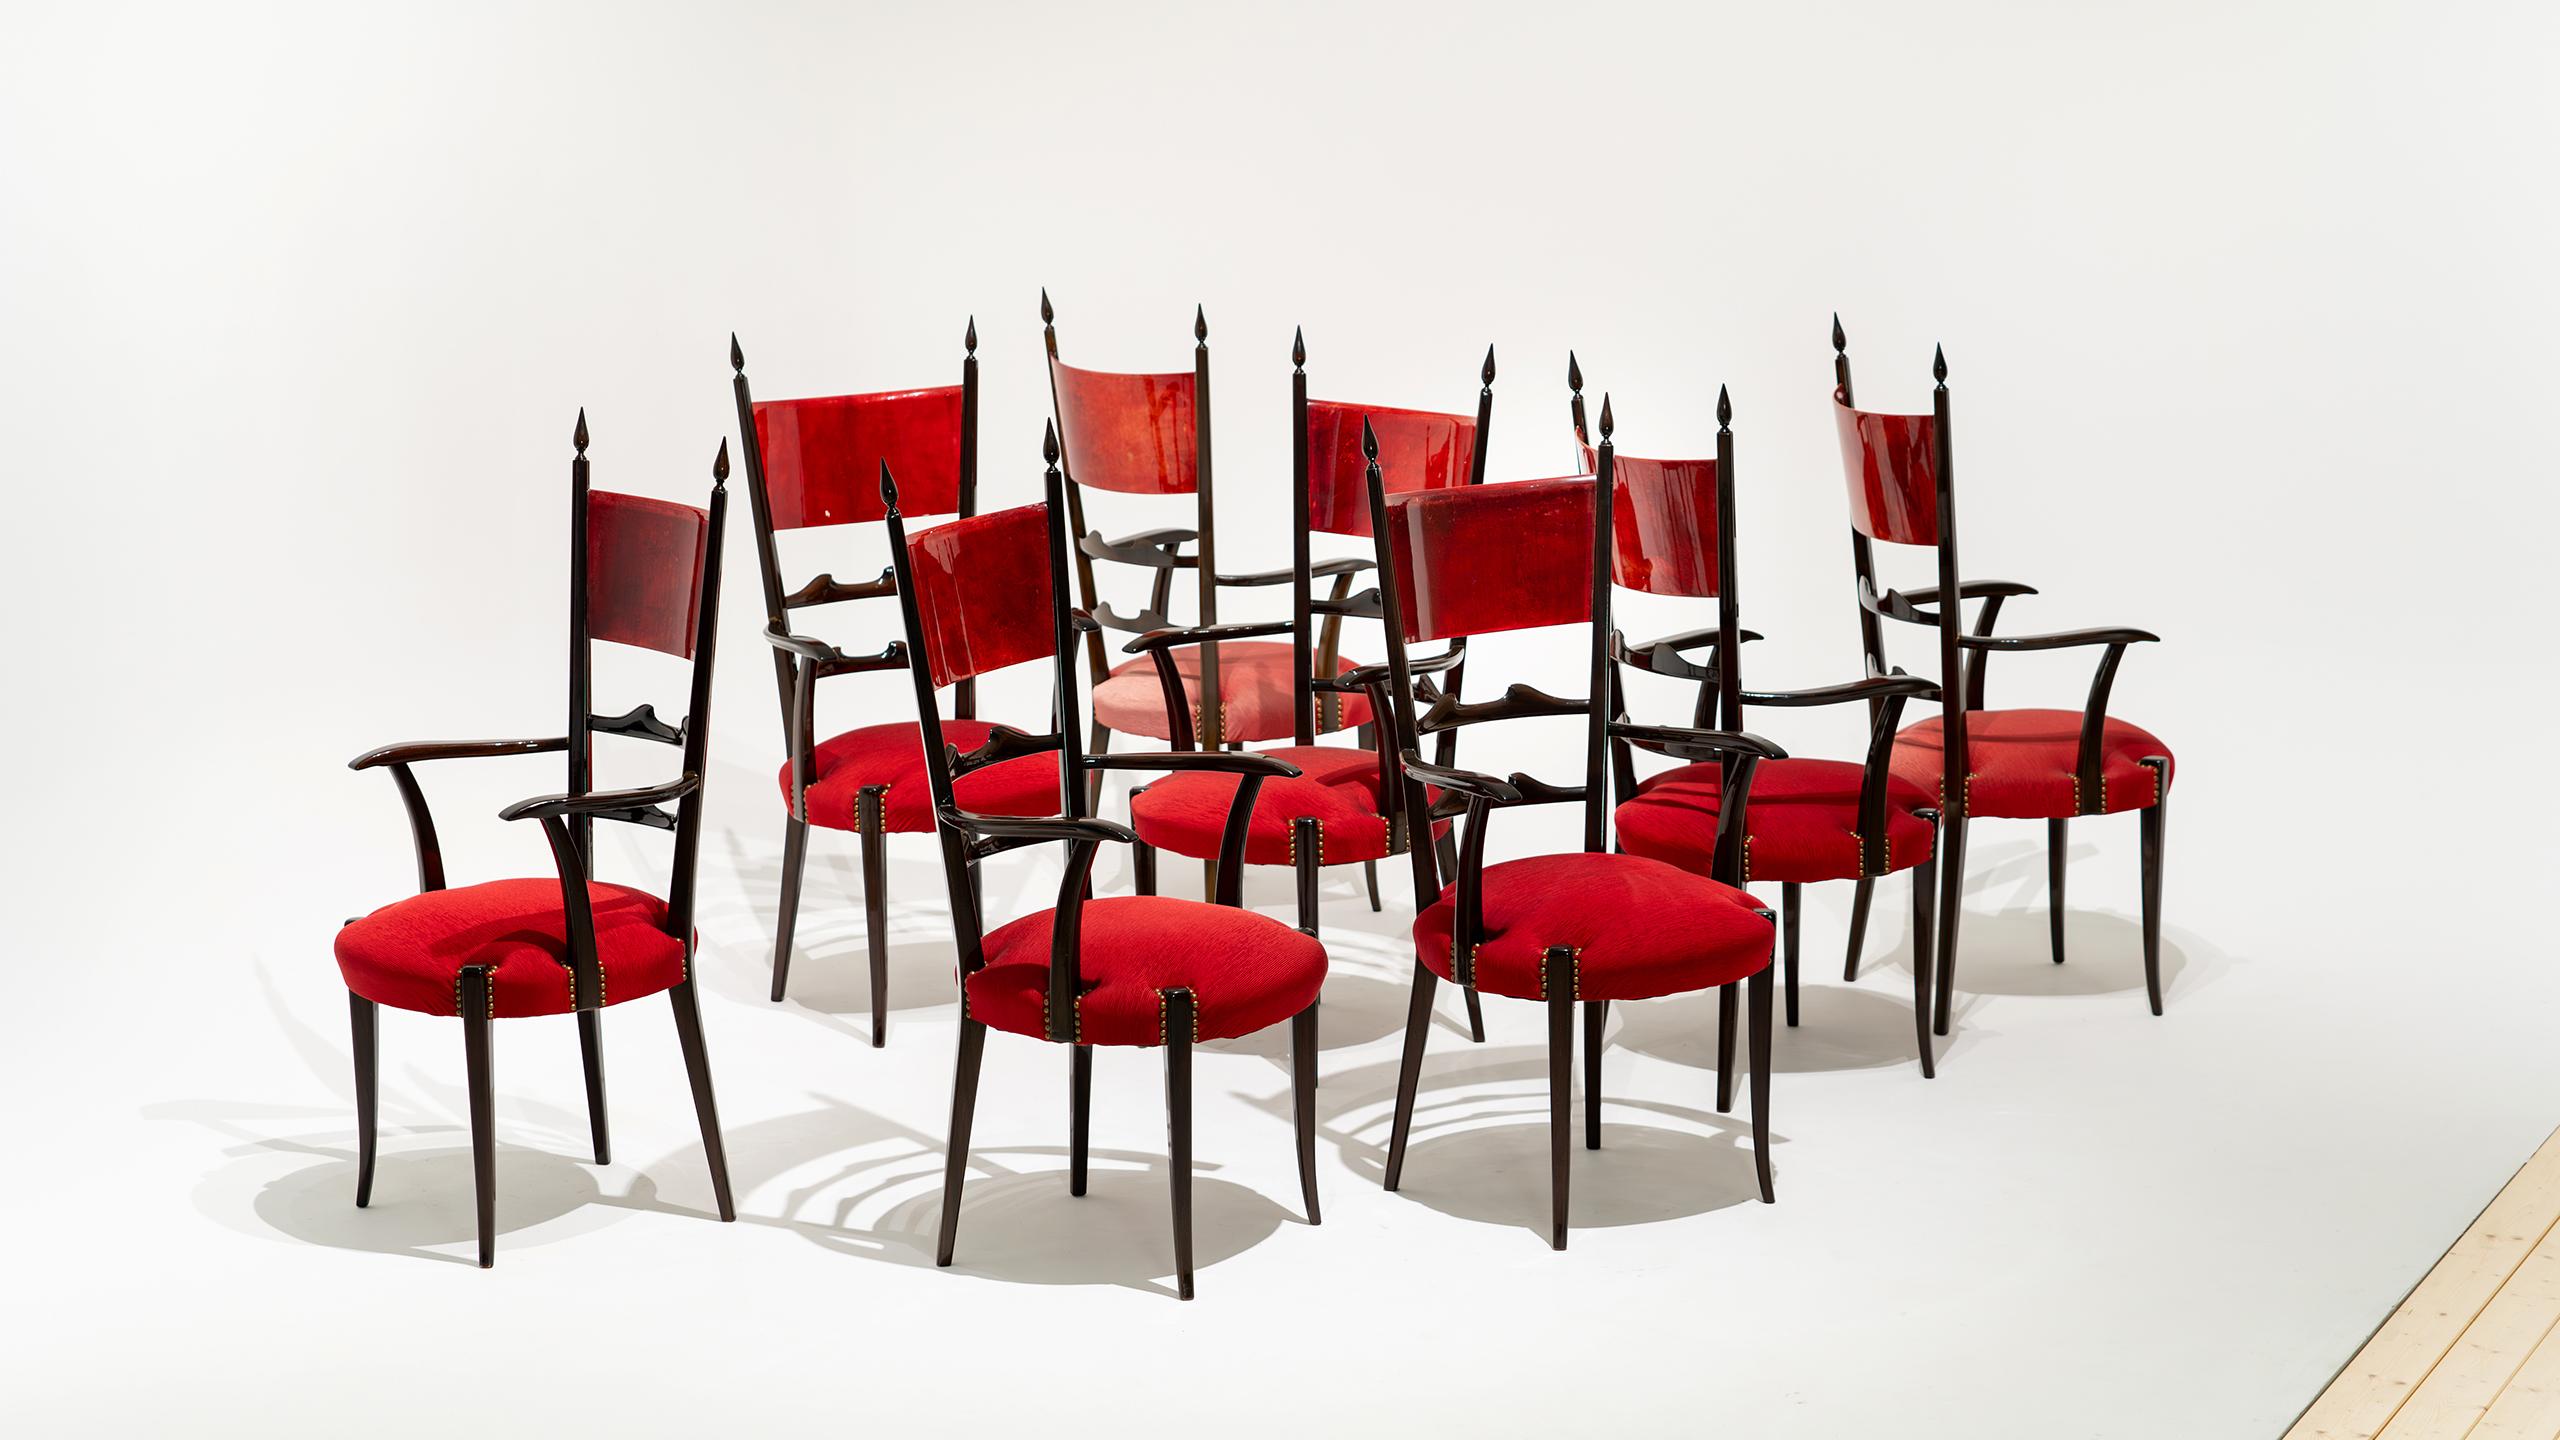 A set of 8 tall ladder-back dining chairs by Aldo Tura, 1962 for Atélier Tura.

The chairs frames are made of gloss wood and the backrests feature red lacquered goatskin parchment applied on both front and back.

120cm high, 45cm wide, 46cm deep and